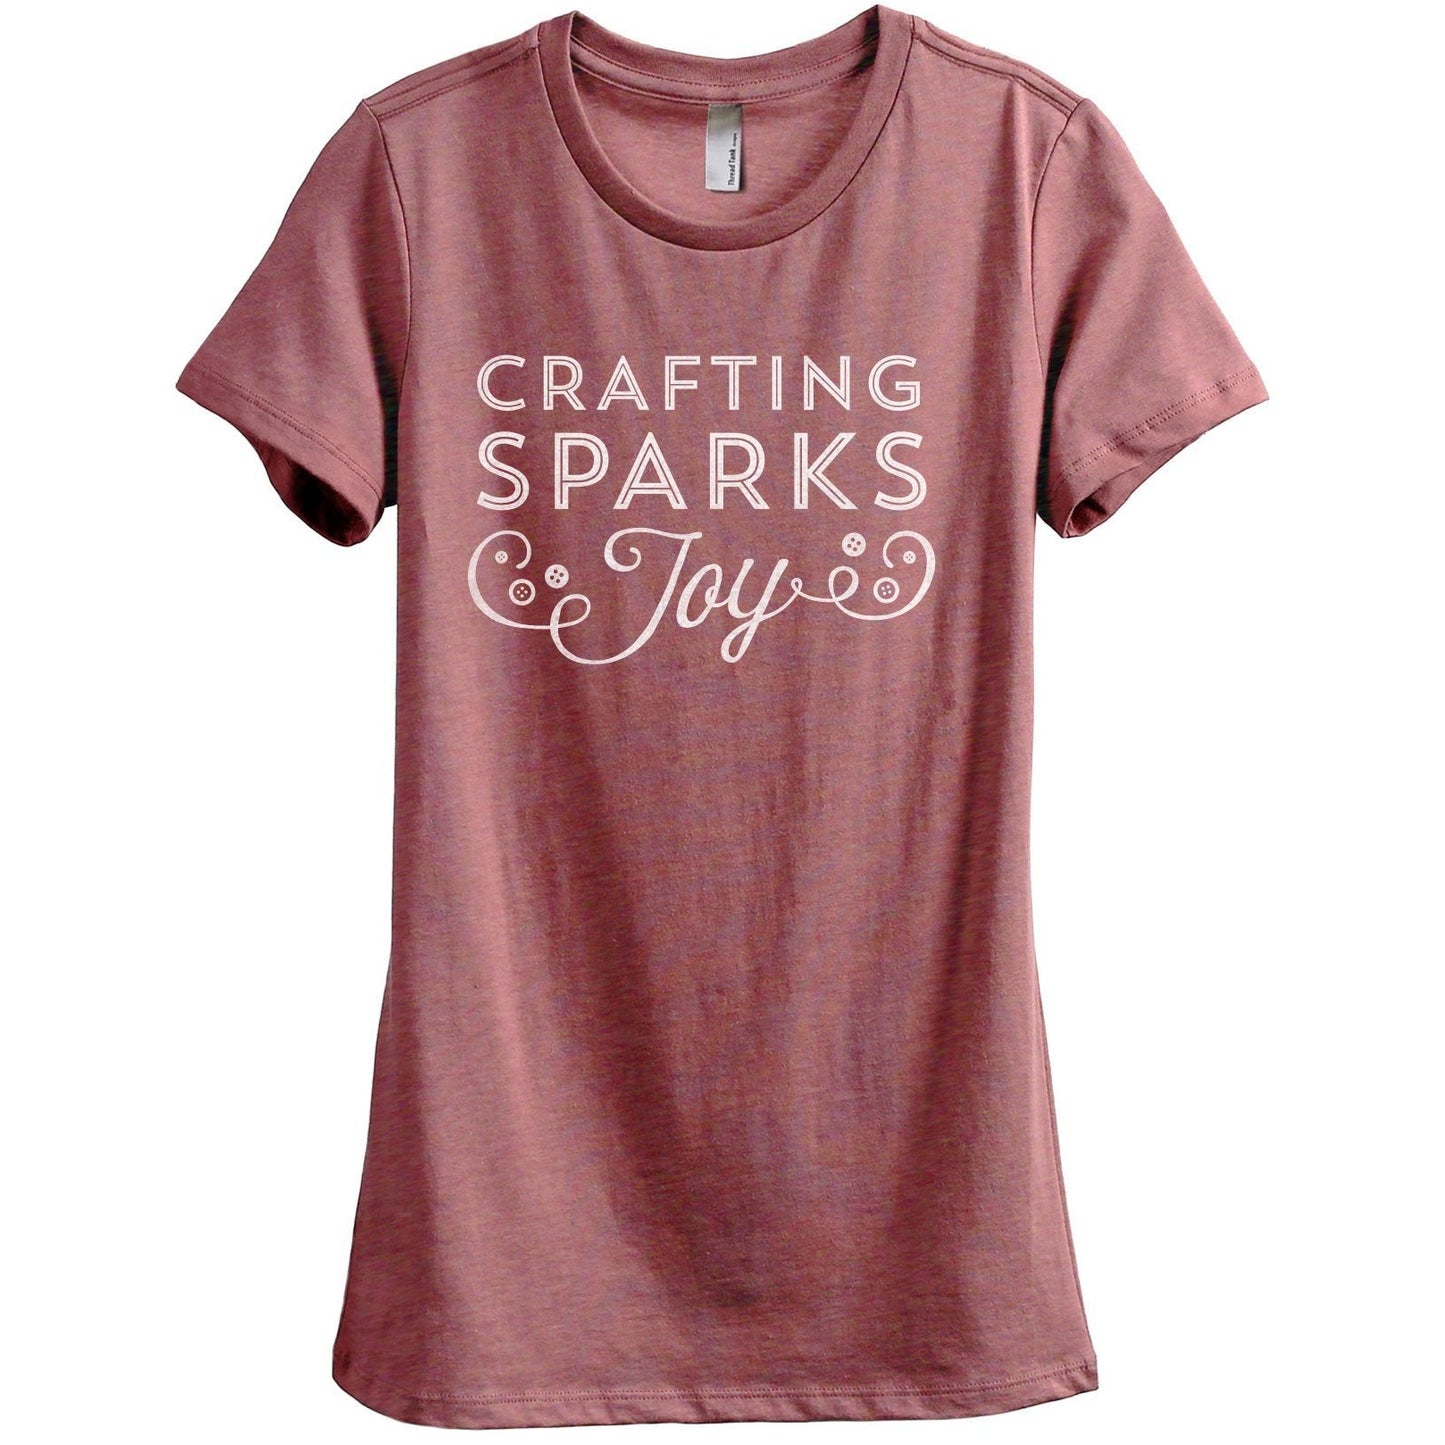 Crafting Sparks Joy Women's Relaxed Crewneck T-Shirt Top Tee Heather Rouge